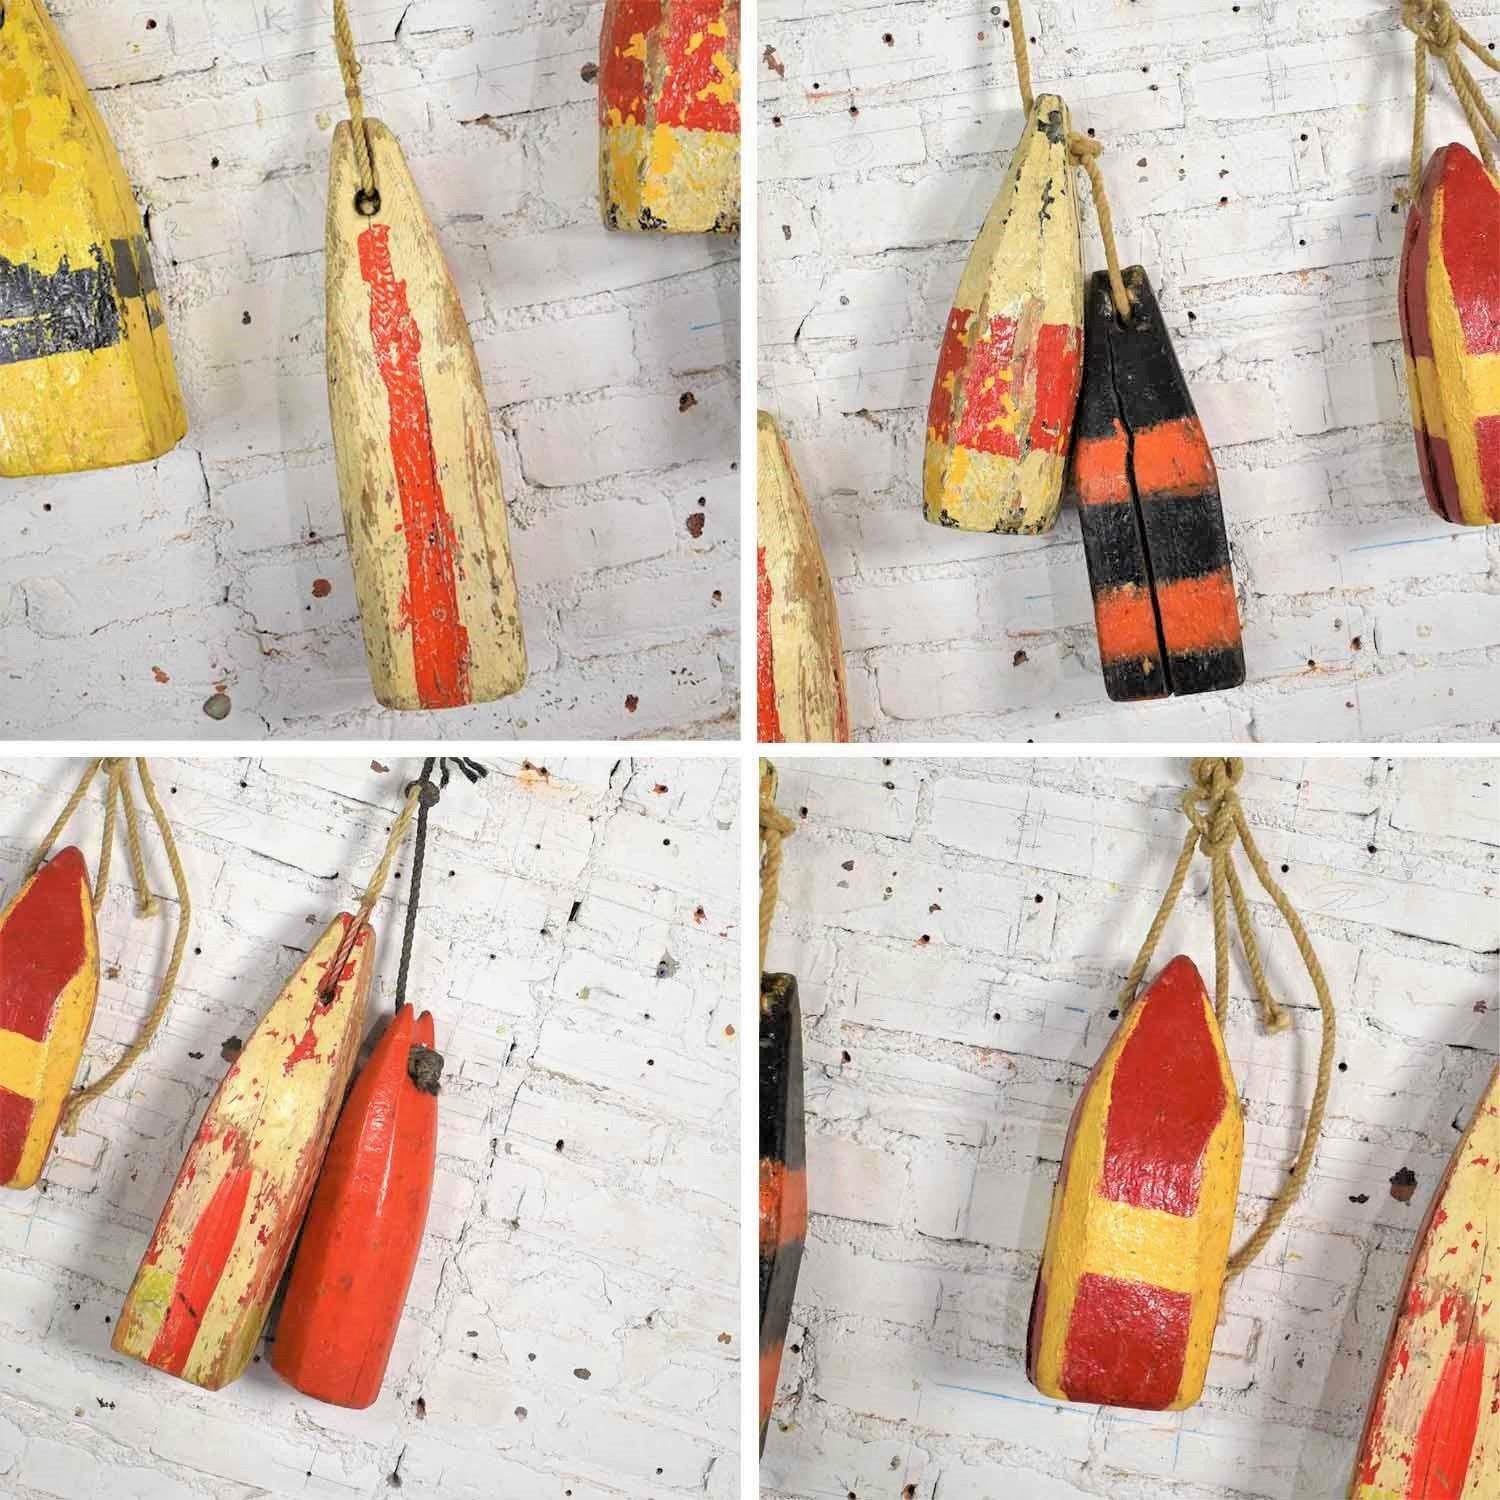 Vintage Painted Wood Authentic Lobster/Crab Trap Buoys Maritime Nautical Décor 4